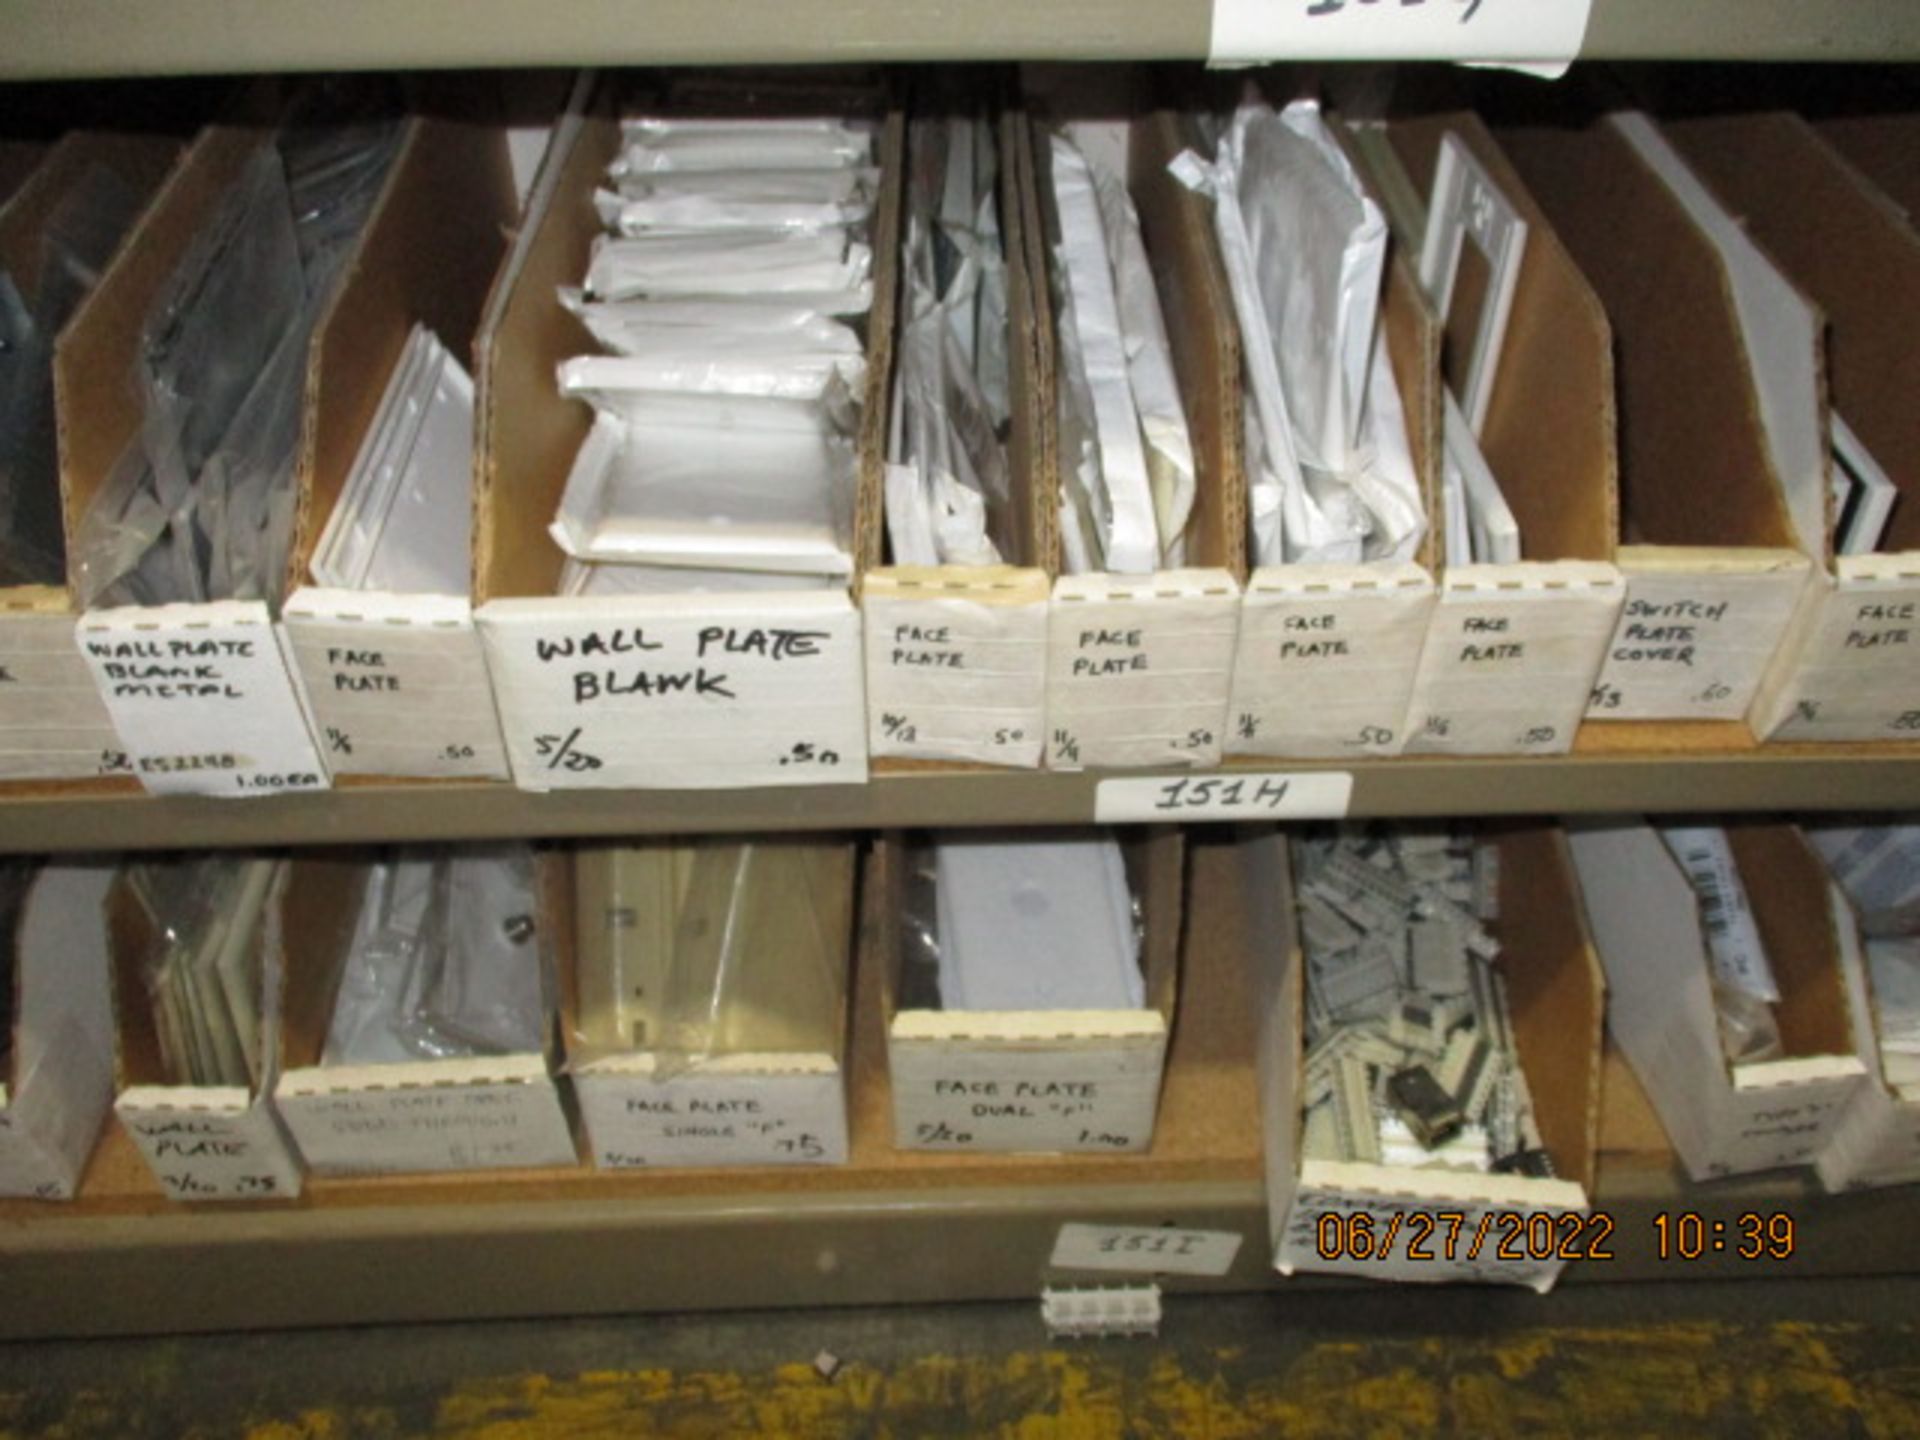 CONTENTS OF SHELVING UNIT CONSISTING OF FACE PLATES, PHONE BOXES, SWITCH PLATE COVERS, WALL - Image 6 of 6